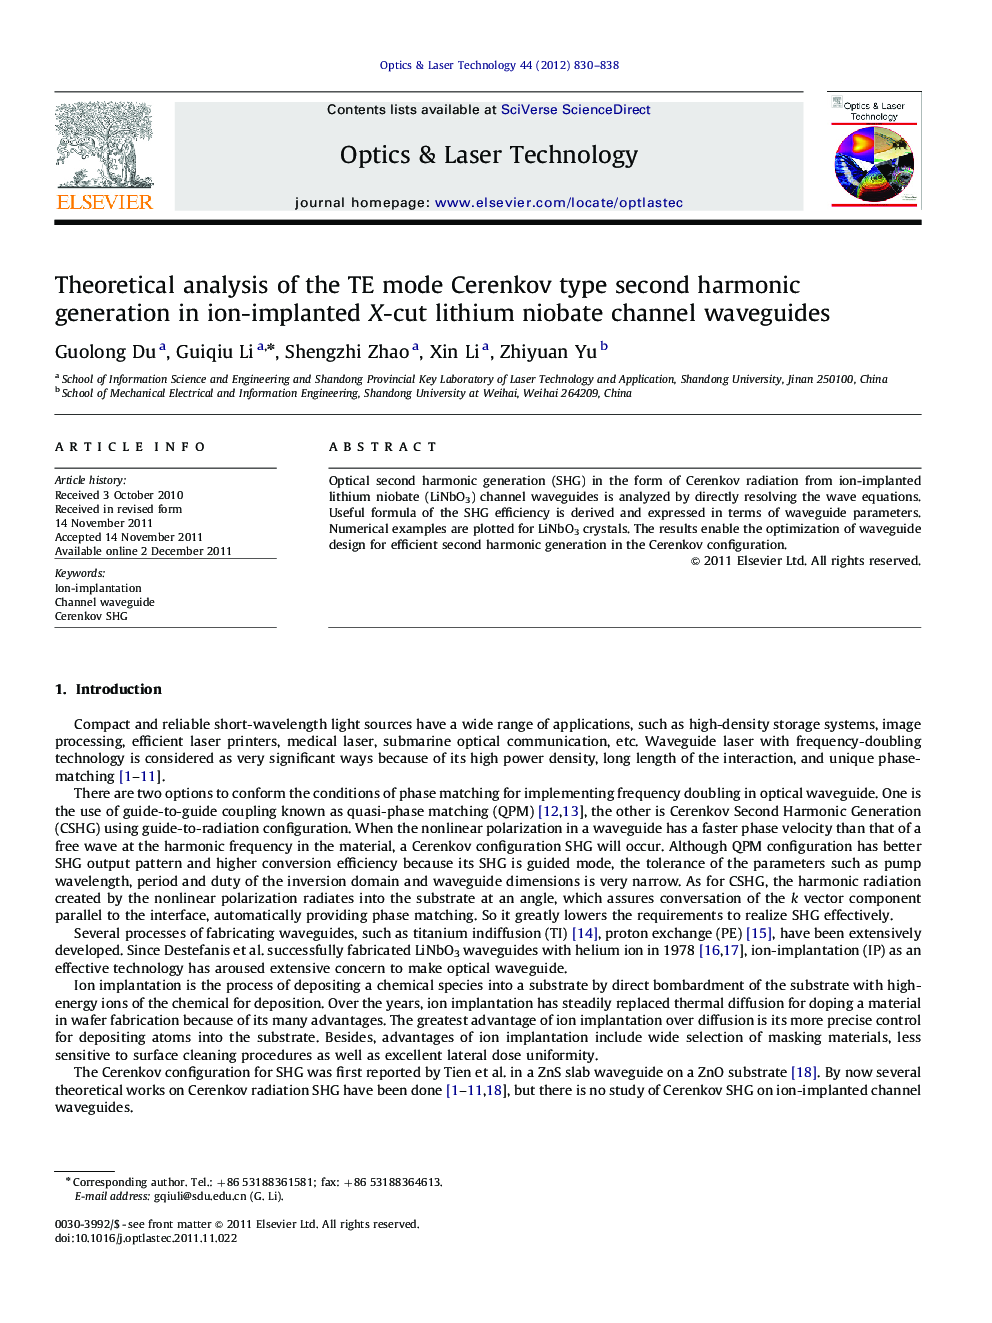 Theoretical analysis of the TE mode Cerenkov type second harmonic generation in ion-implanted X-cut lithium niobate channel waveguides